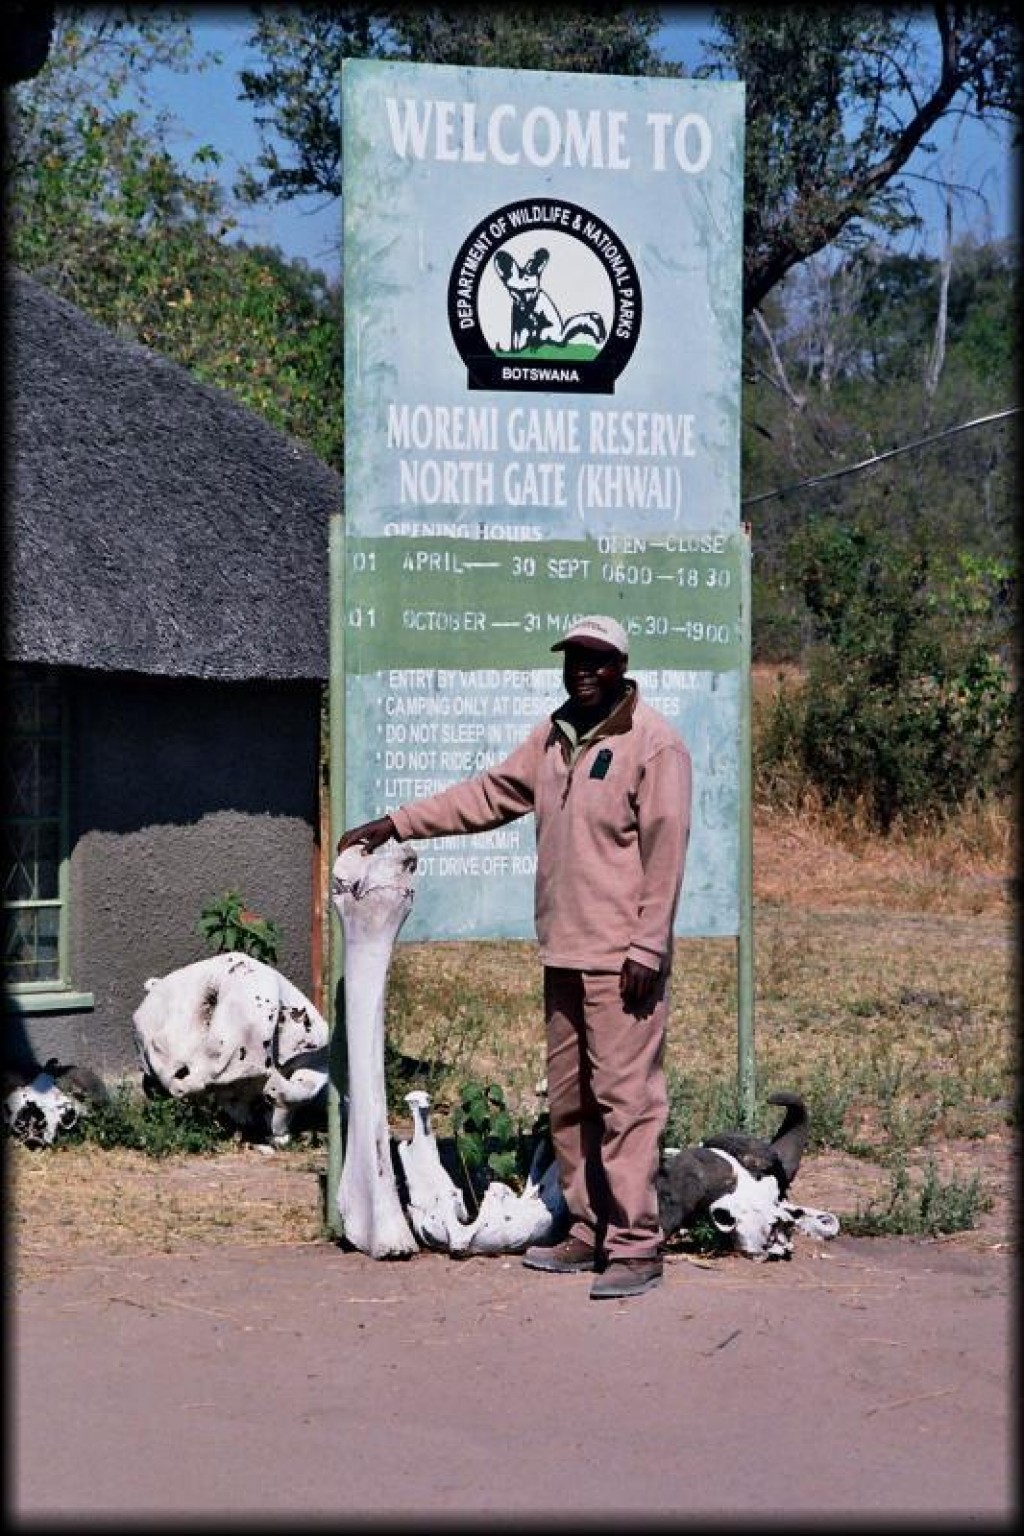 Here we are entering the Moremi Game Reseve, in the Khwai area.  That's an elephant's shin bone that Sam's holding up.  And in case you were beginning to wonder, Sam's at least 6' tall.